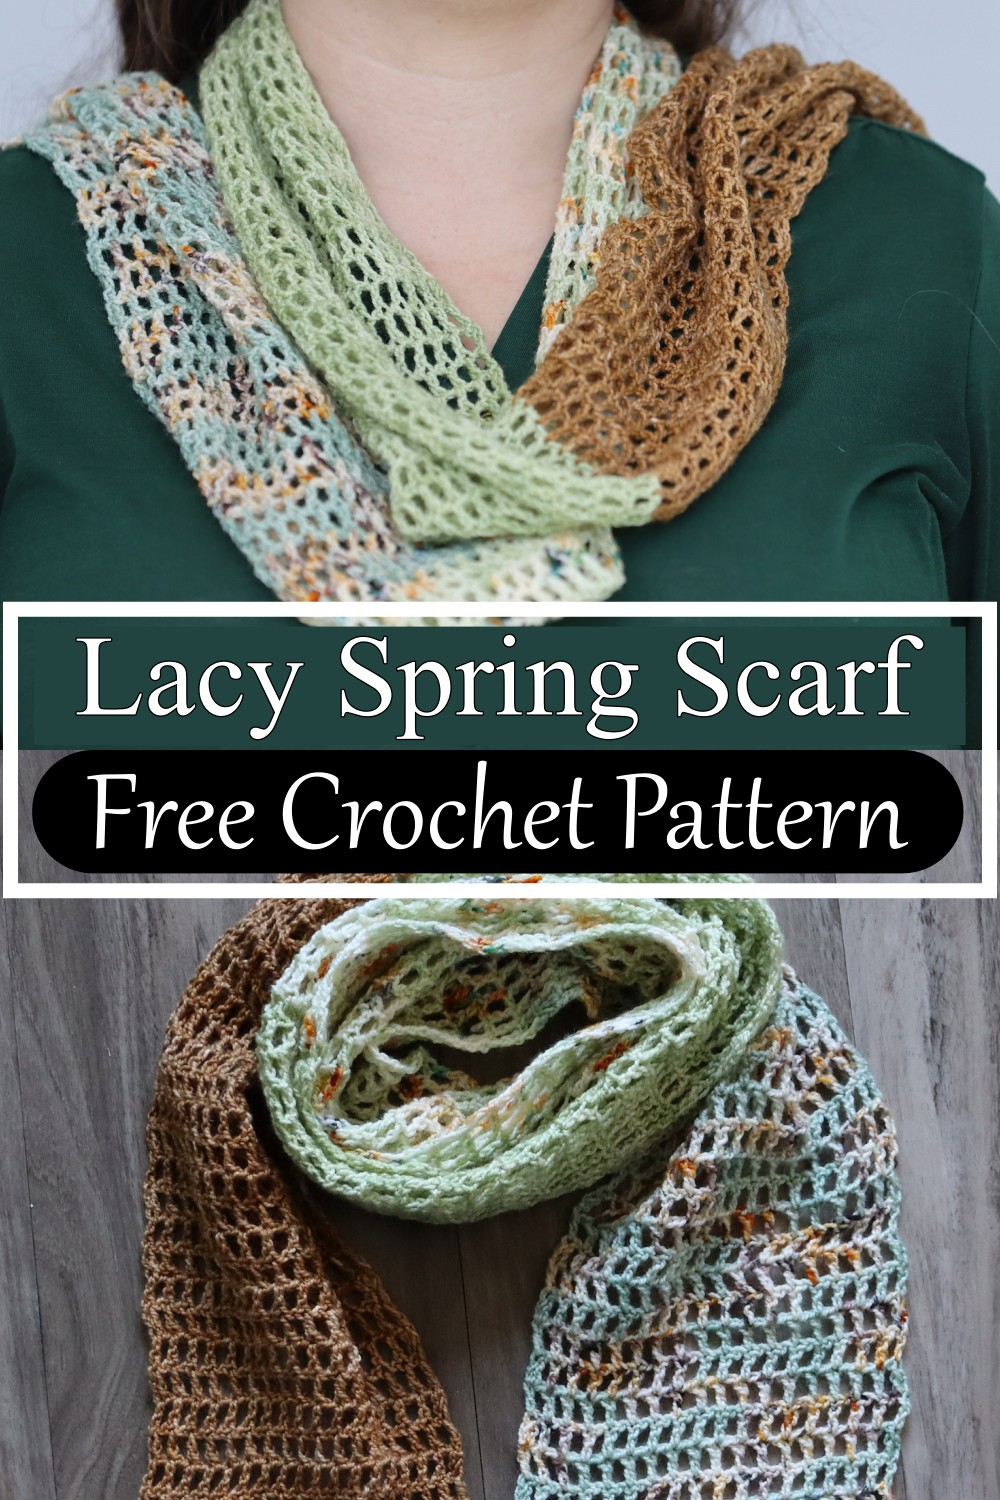 Lacy Spring Scarf